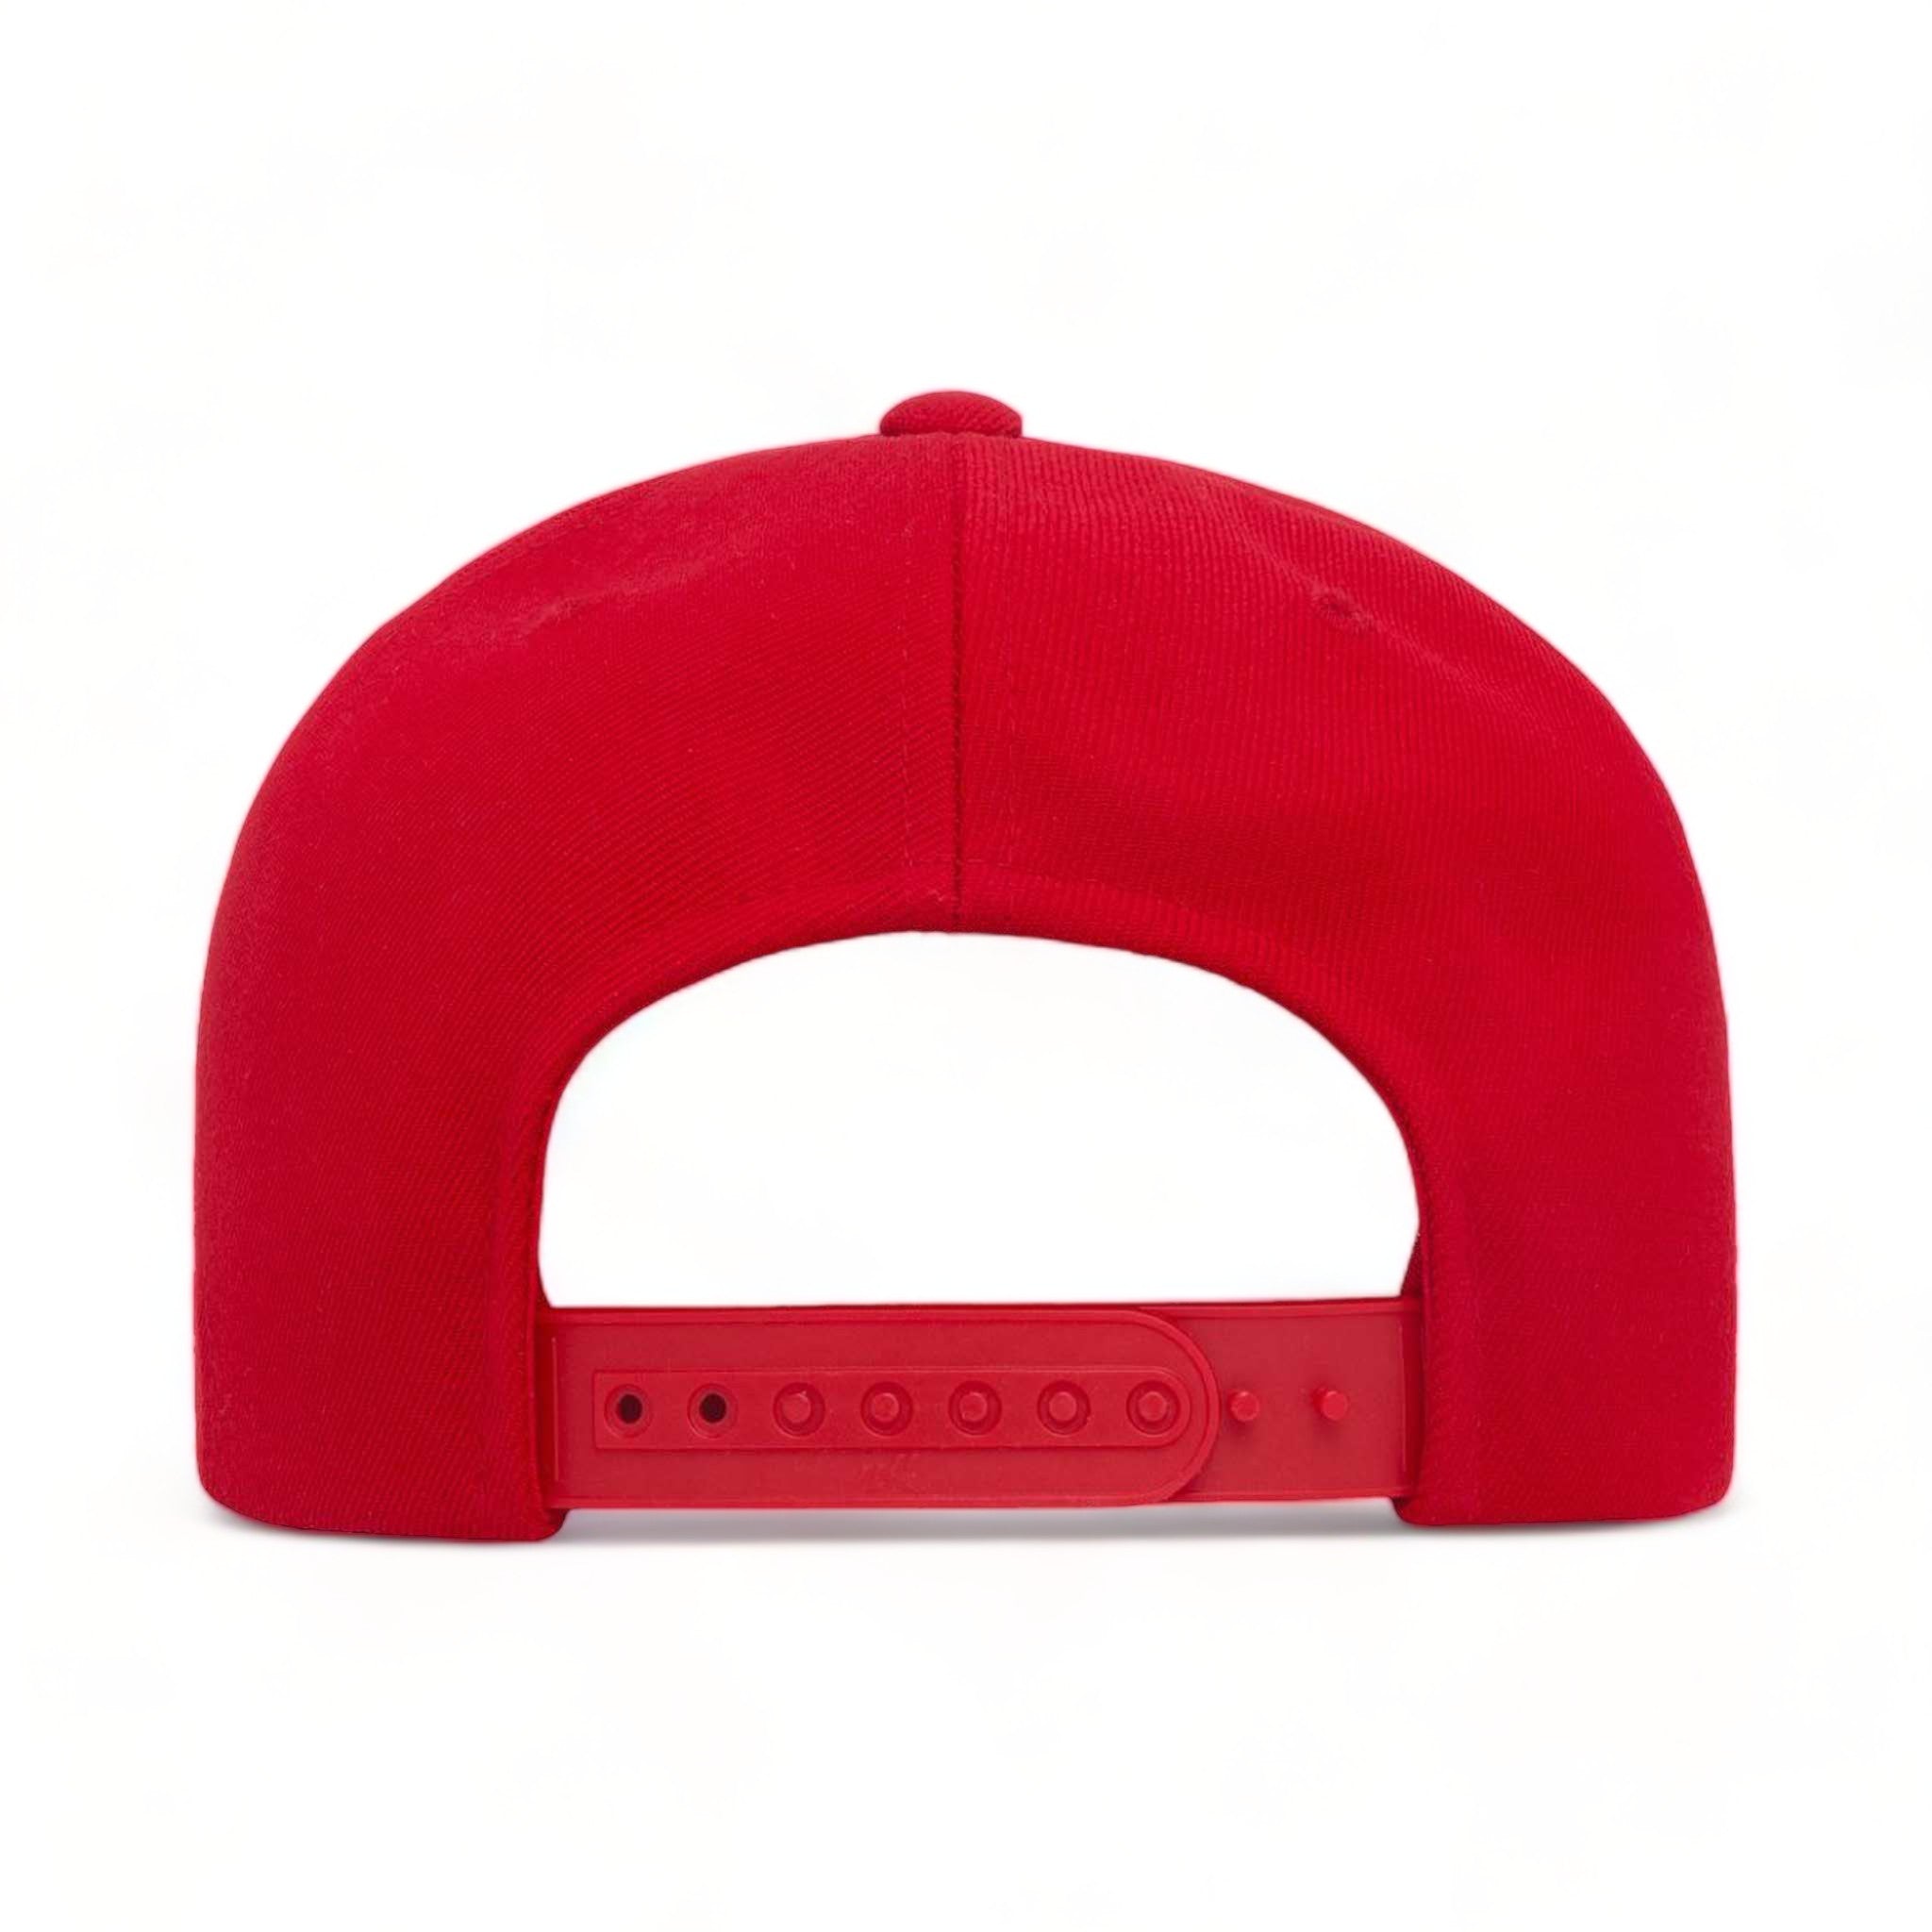 Back view of YP Classics 6089M custom hat in red